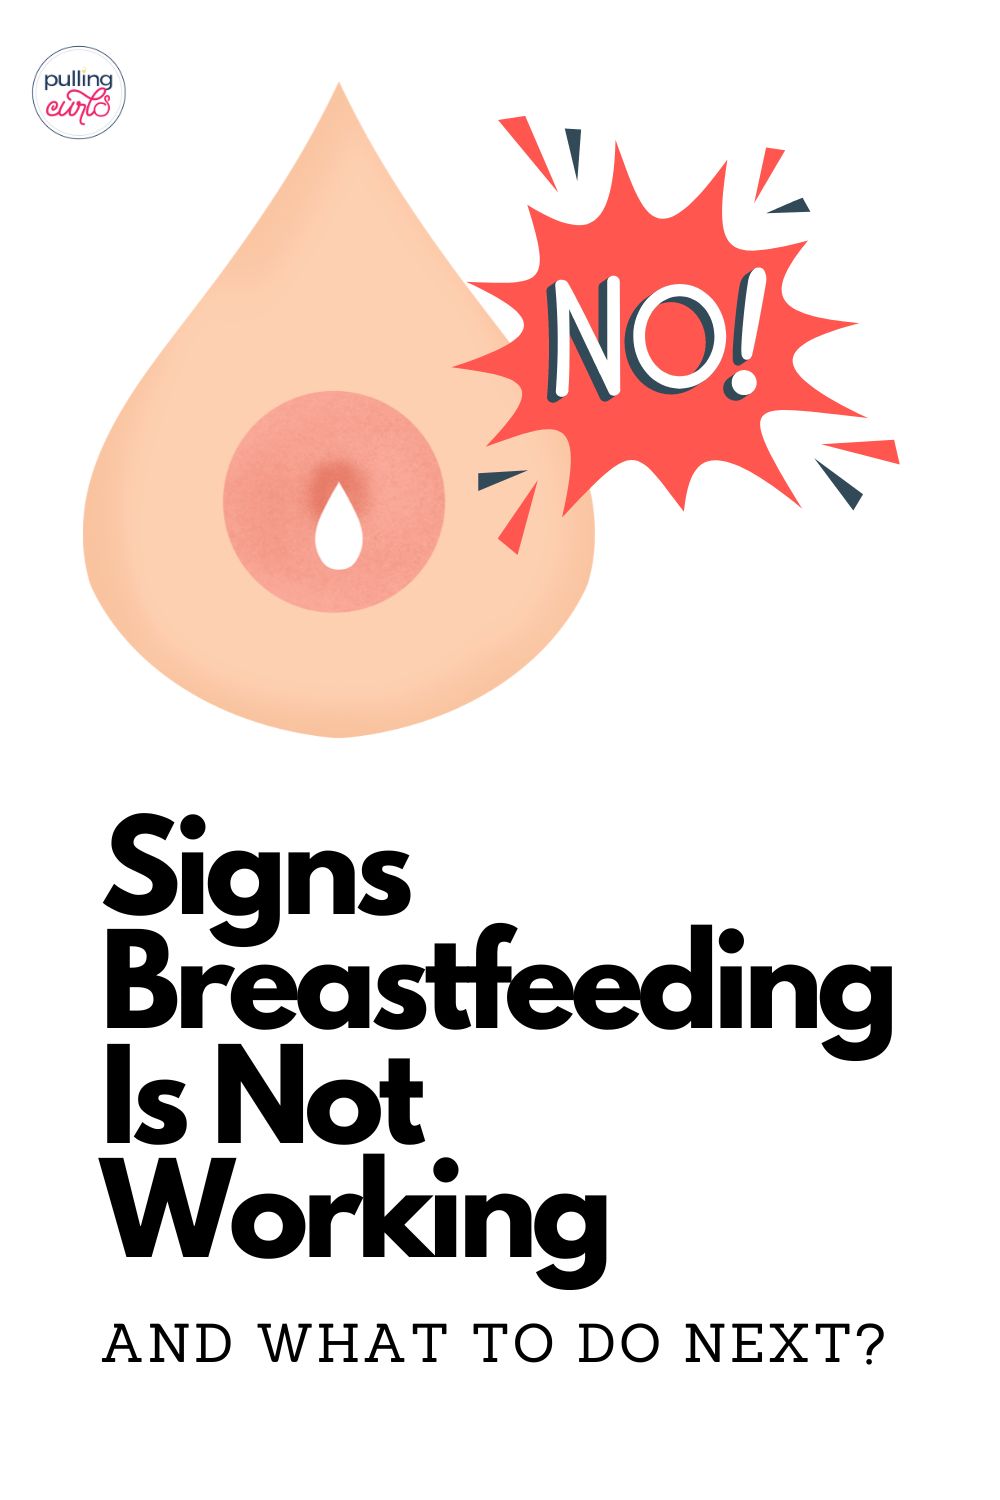 Struggling with breastfeeding? Don't let guilt consume you. This comprehensive guide helps you to recognize the signs that breastfeeding isn't working, and offers alternatives to ensure your baby's nutritional needs are met. via @pullingcurls